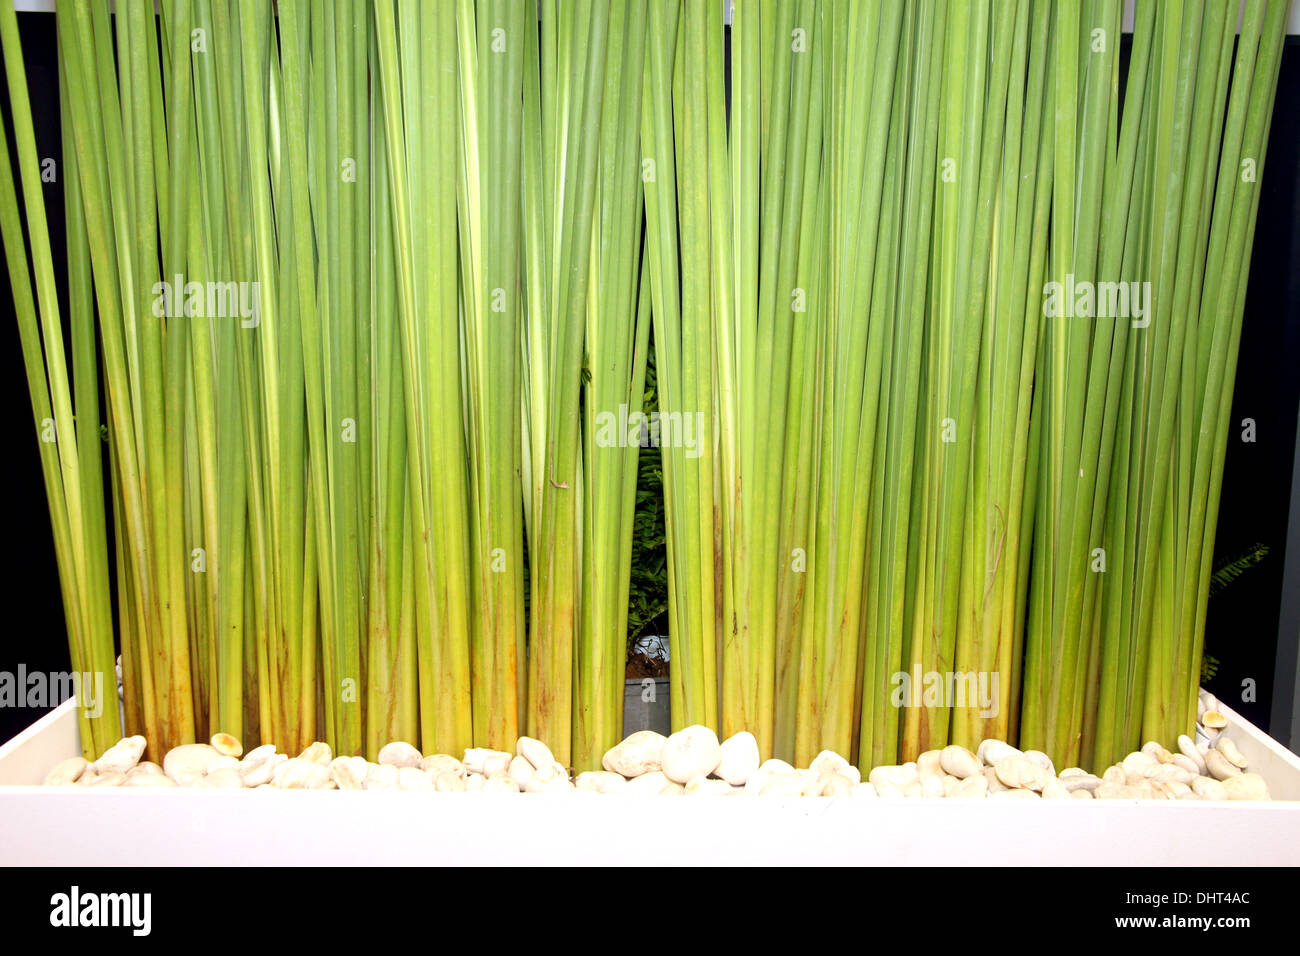 The Picture Stems of green plants. Stock Photo